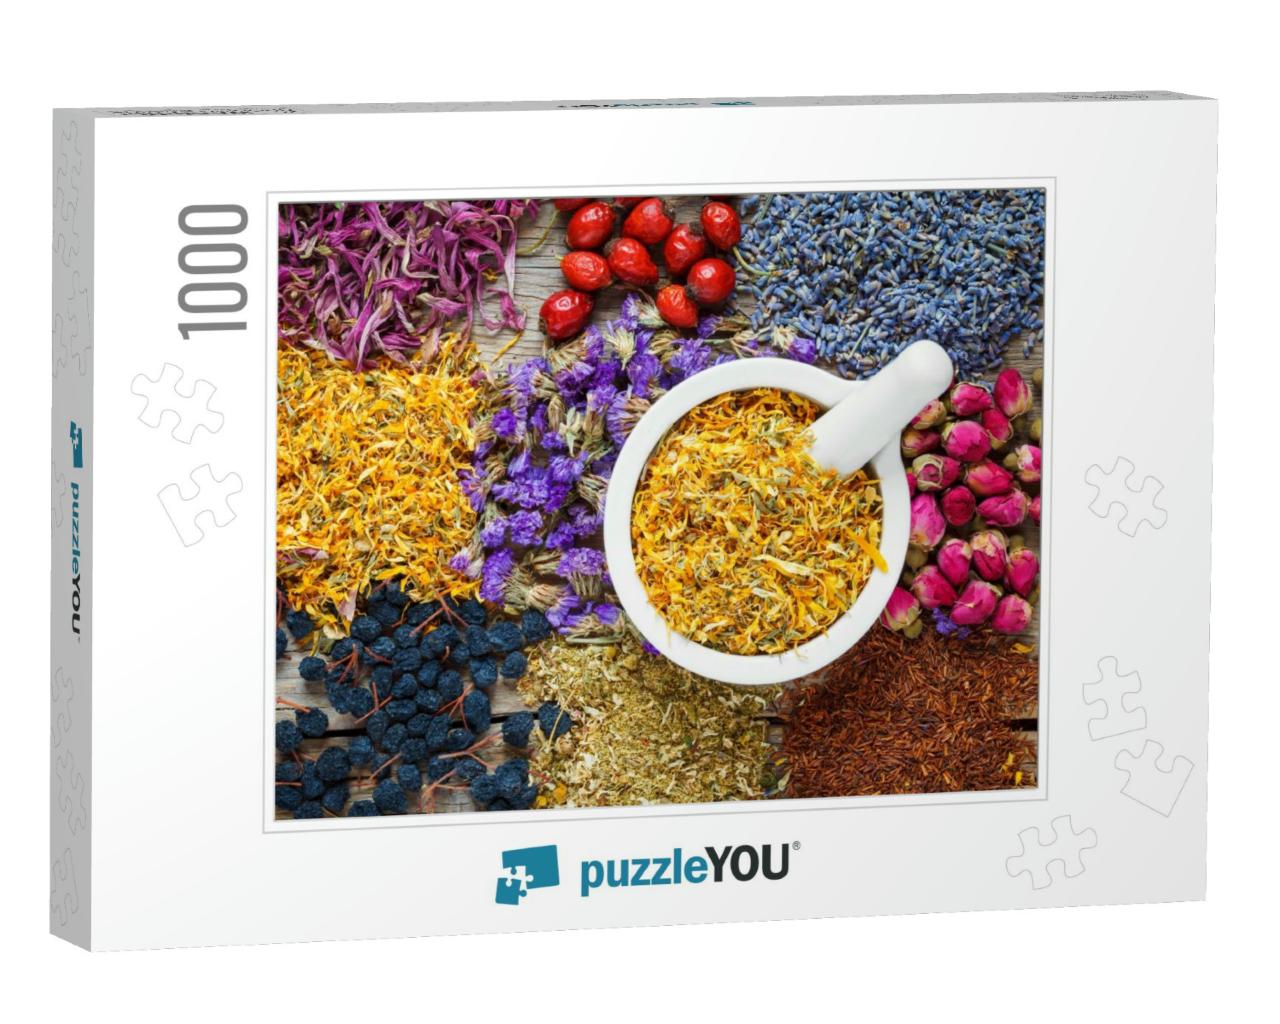 Mortar of Dry Marigold Flowers, Healthy Herbs, Herbal Tea... Jigsaw Puzzle with 1000 pieces